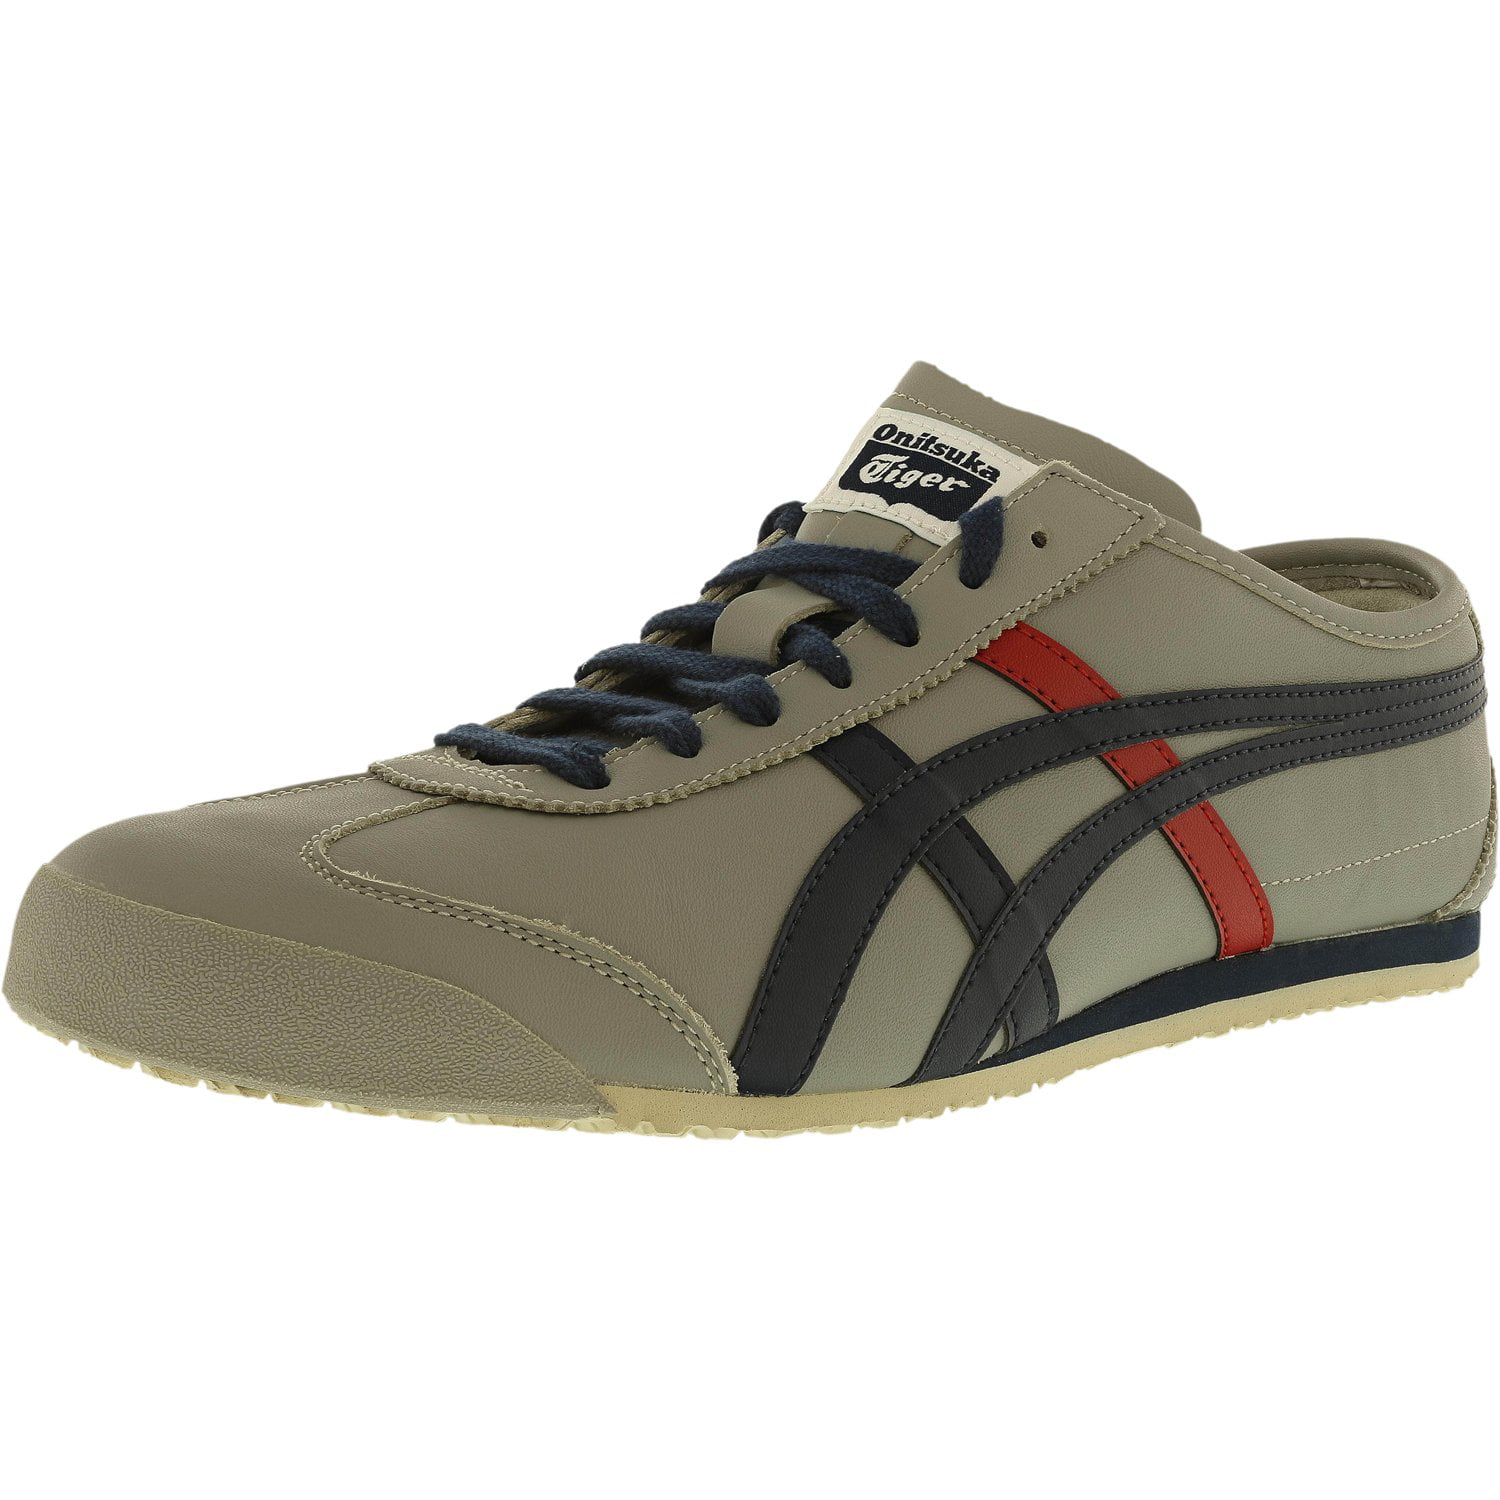 Onitsuka Tiger Mexico 66 Light Grey / Navy Ankle-High Leather Fashion